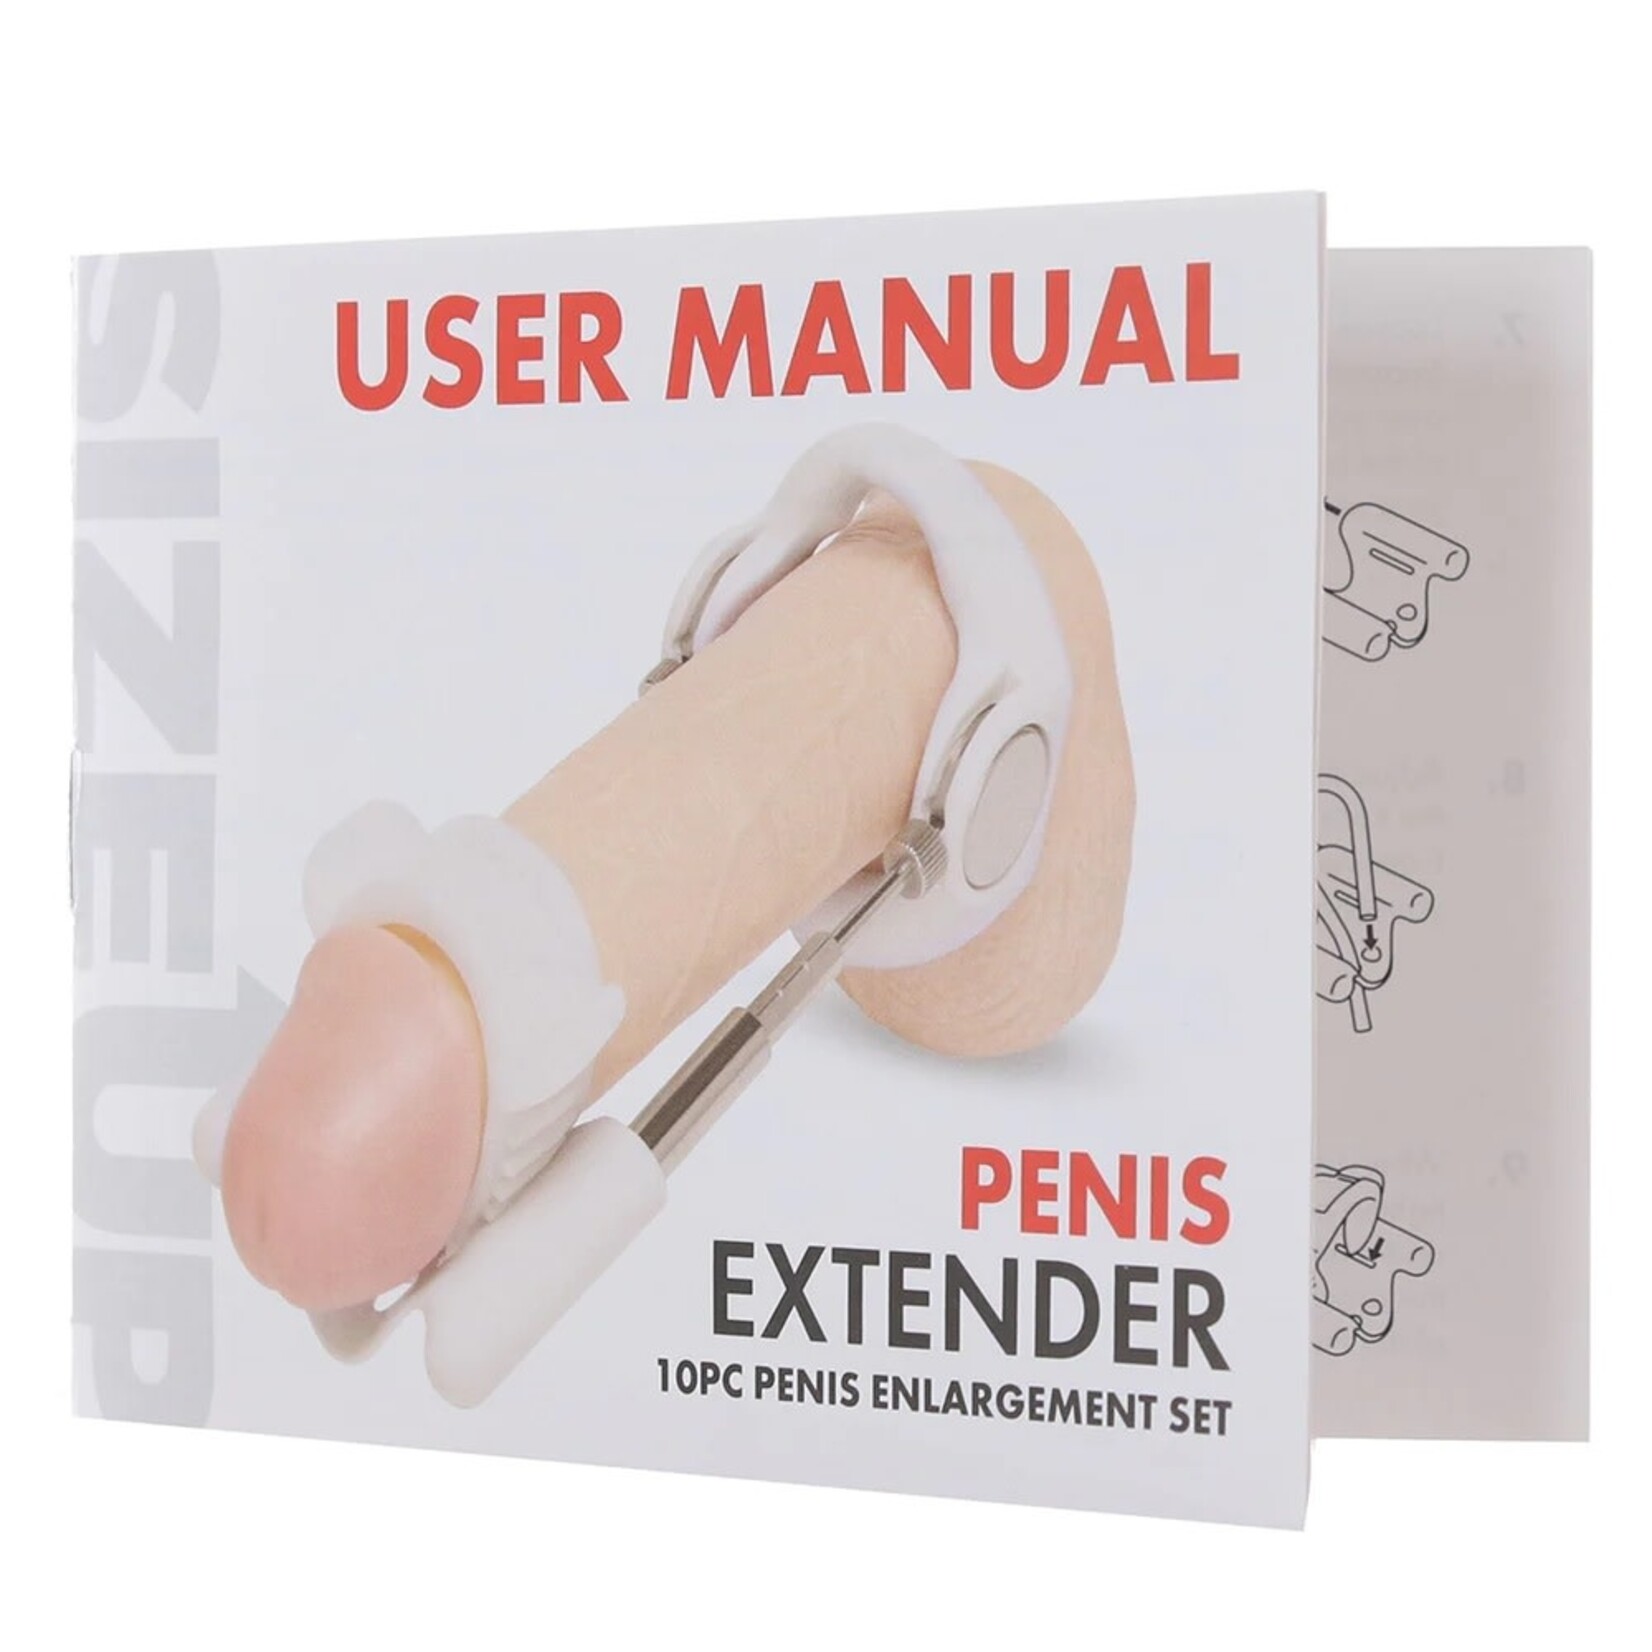 SIZE UP PENIS ENLARGEMENT SET IN WHITE